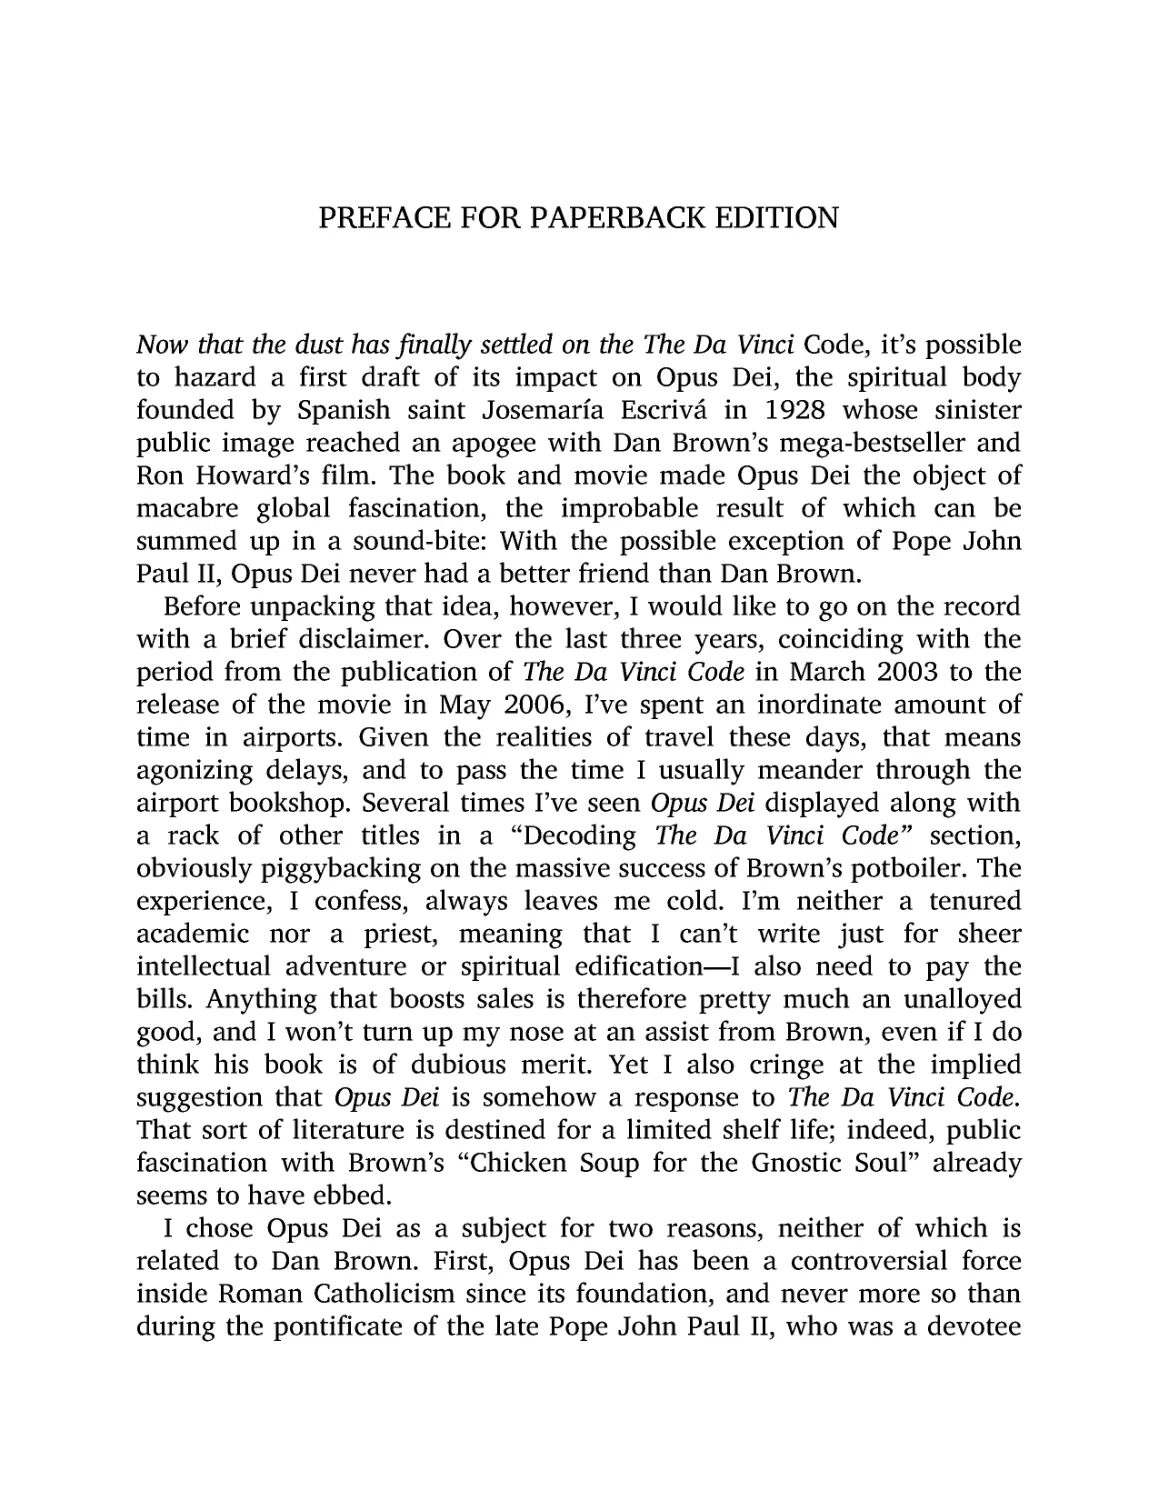 Preface for Paperback Edition